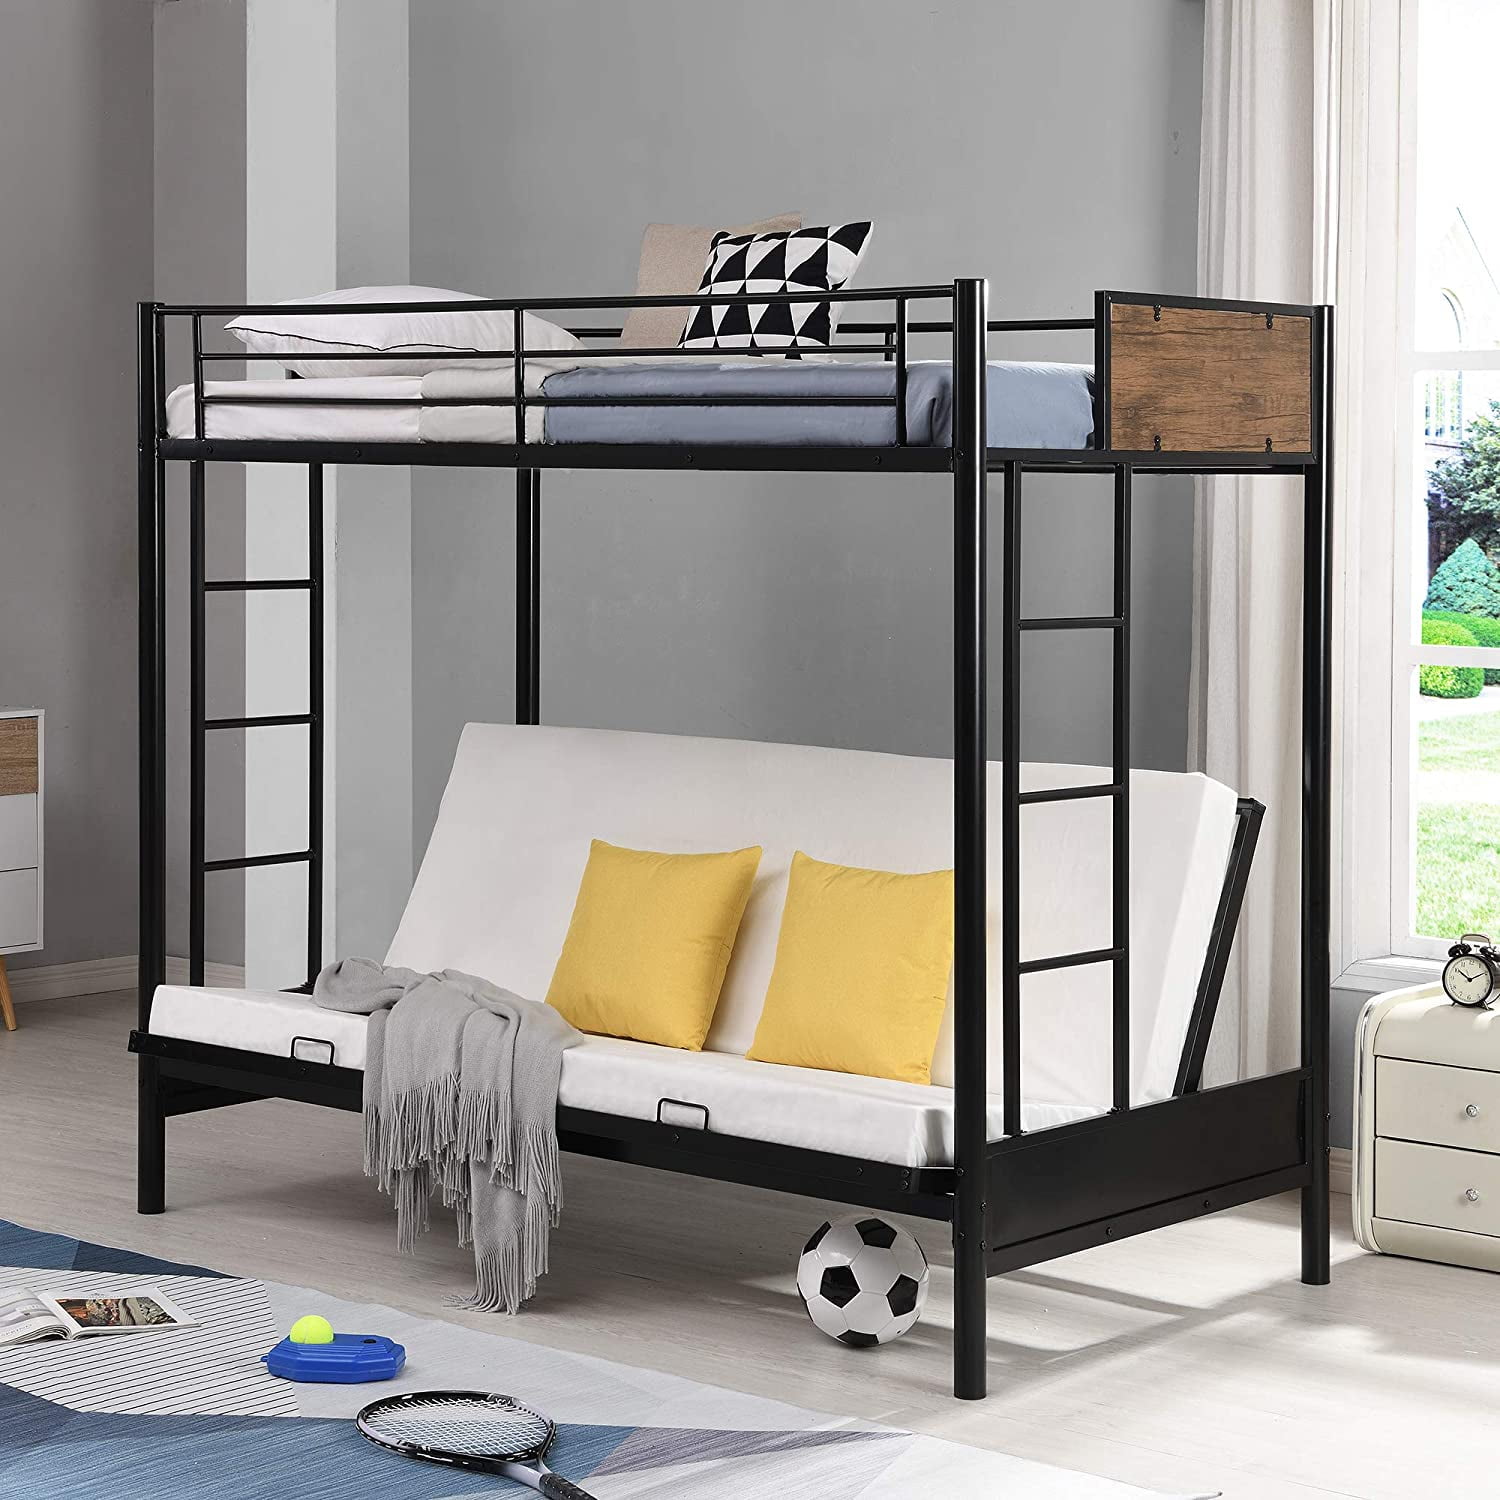 Piscis Convertible Twin Over Futon Bed, Full Side Bunk Beds